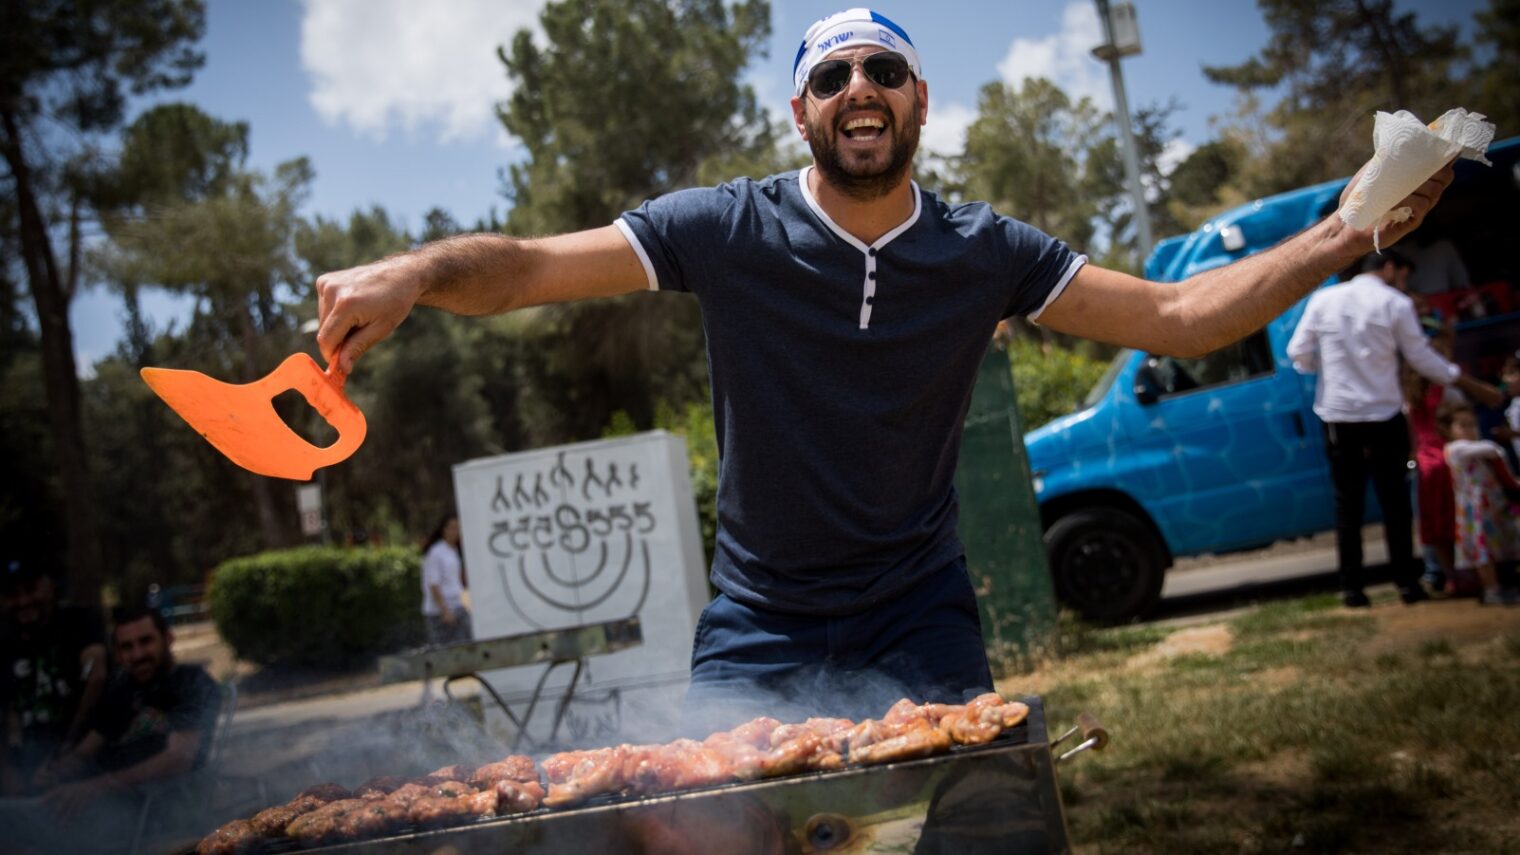 An Israeli grill master wields his nafnaf at an Independence Day cookout. Photo by Yonatan Sindel/FLASH90